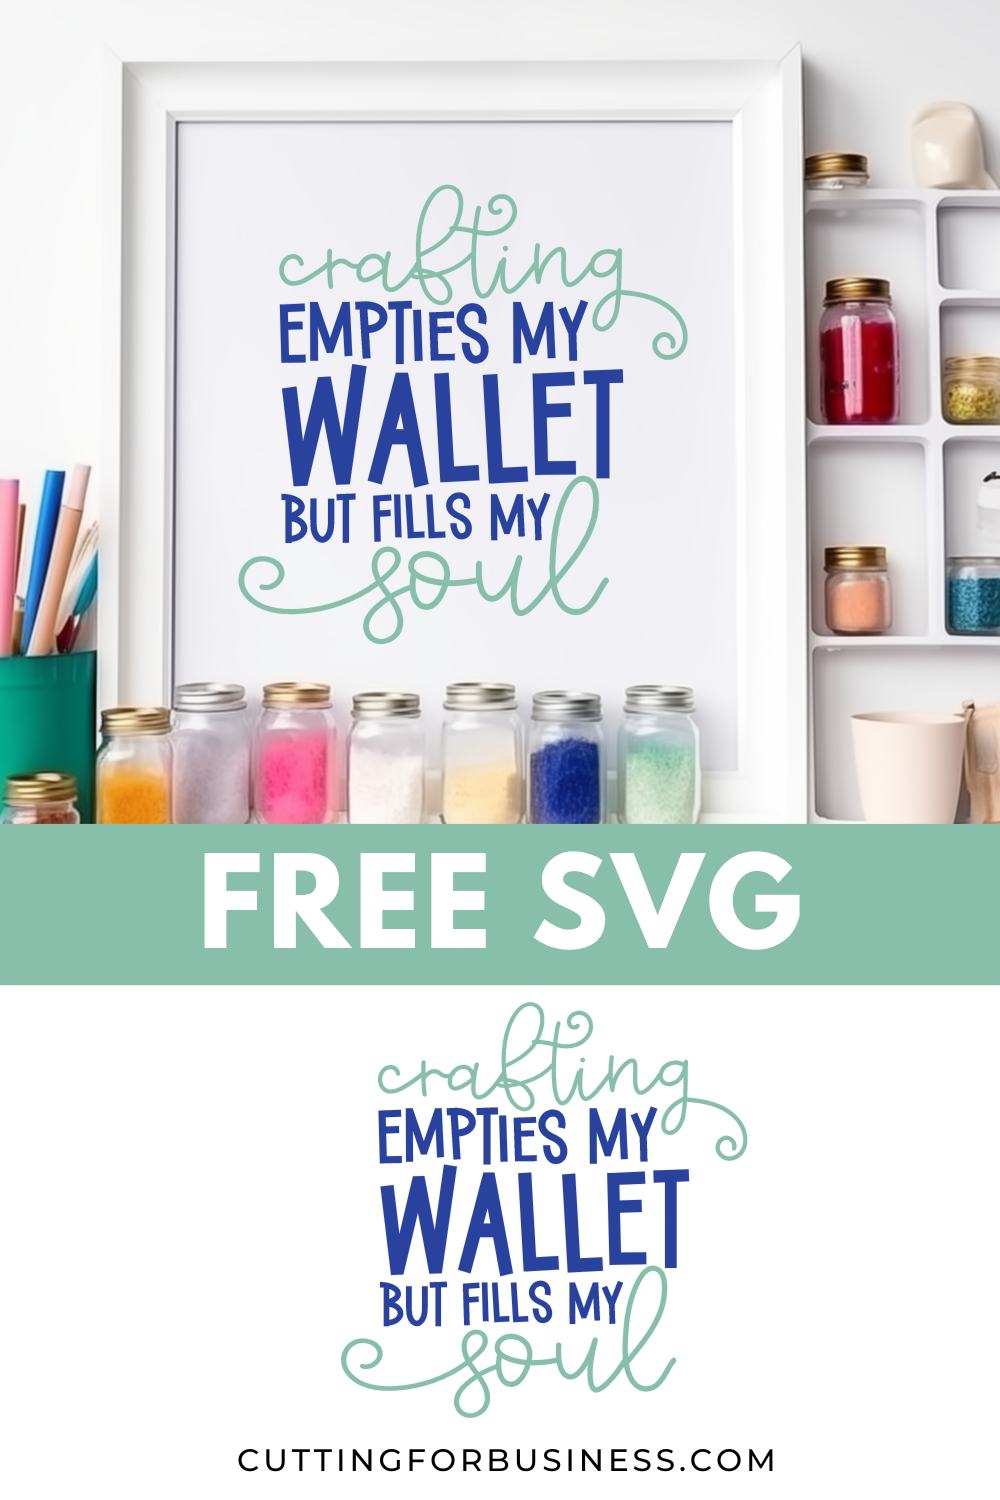 Free SVG - Crafting Empties My Wallet - cuttingforbusiness.com